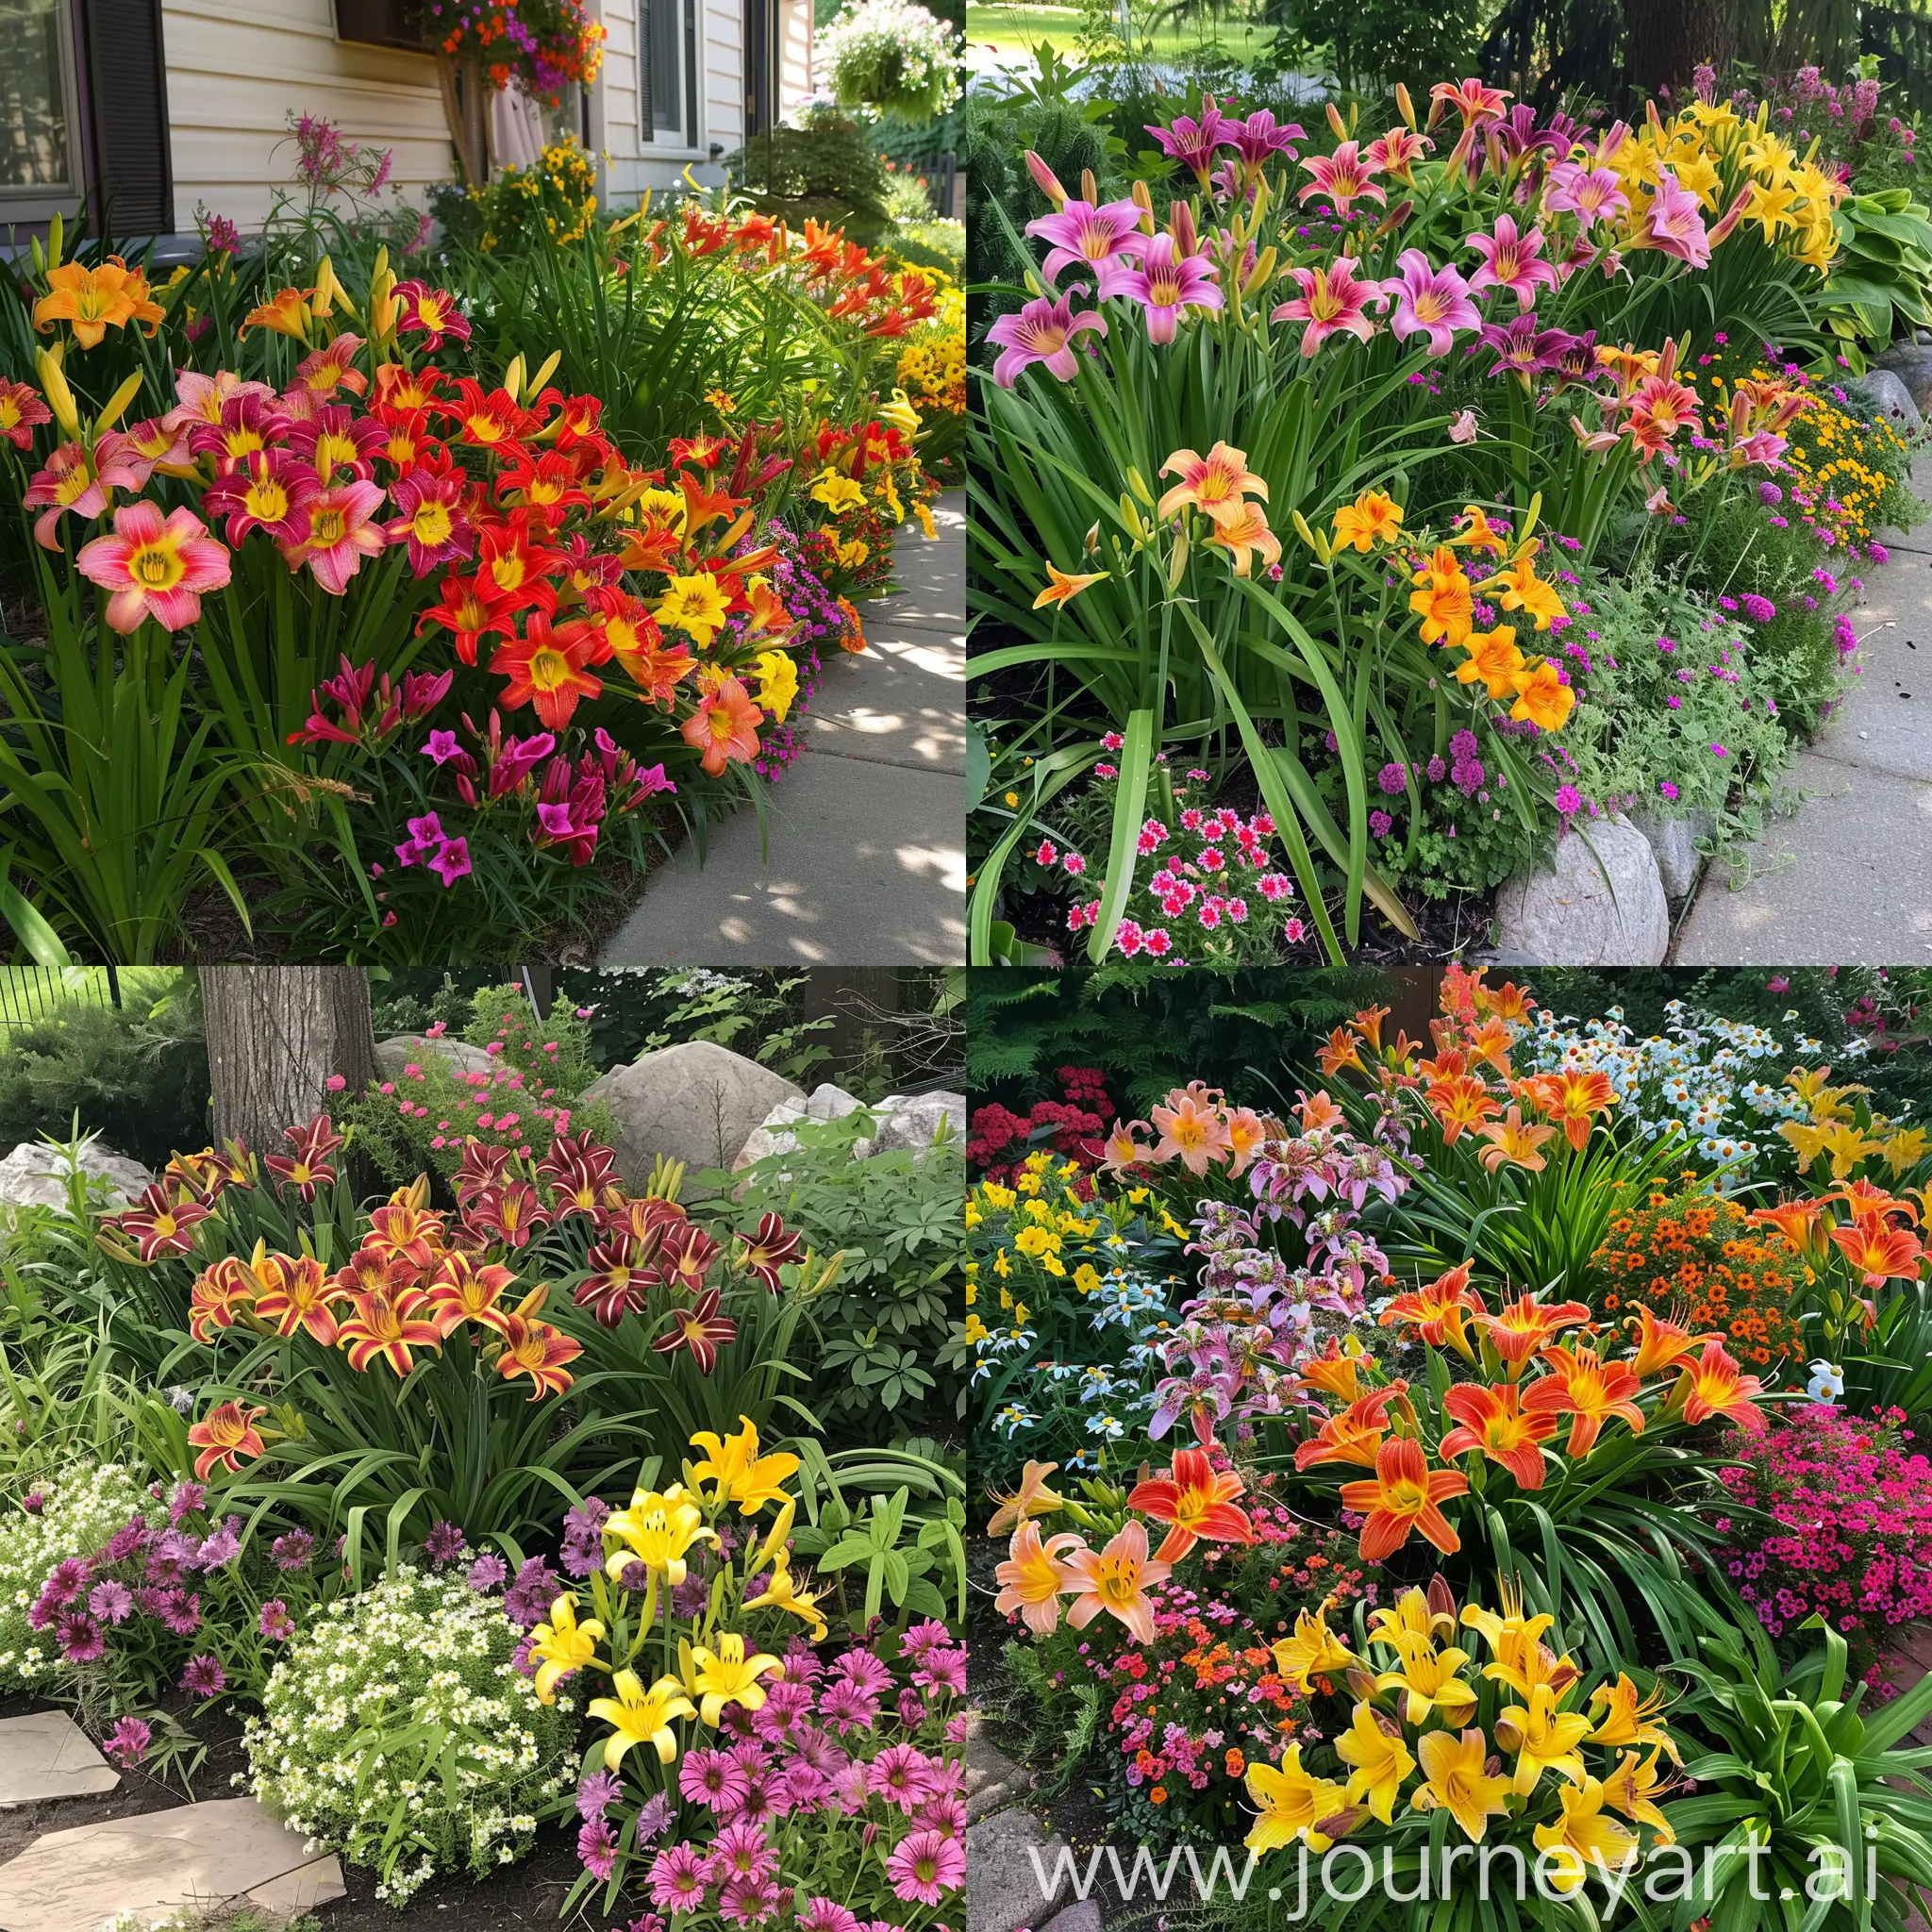 Colorful-Daylilies-in-Mixed-Planting-Garden-Bed